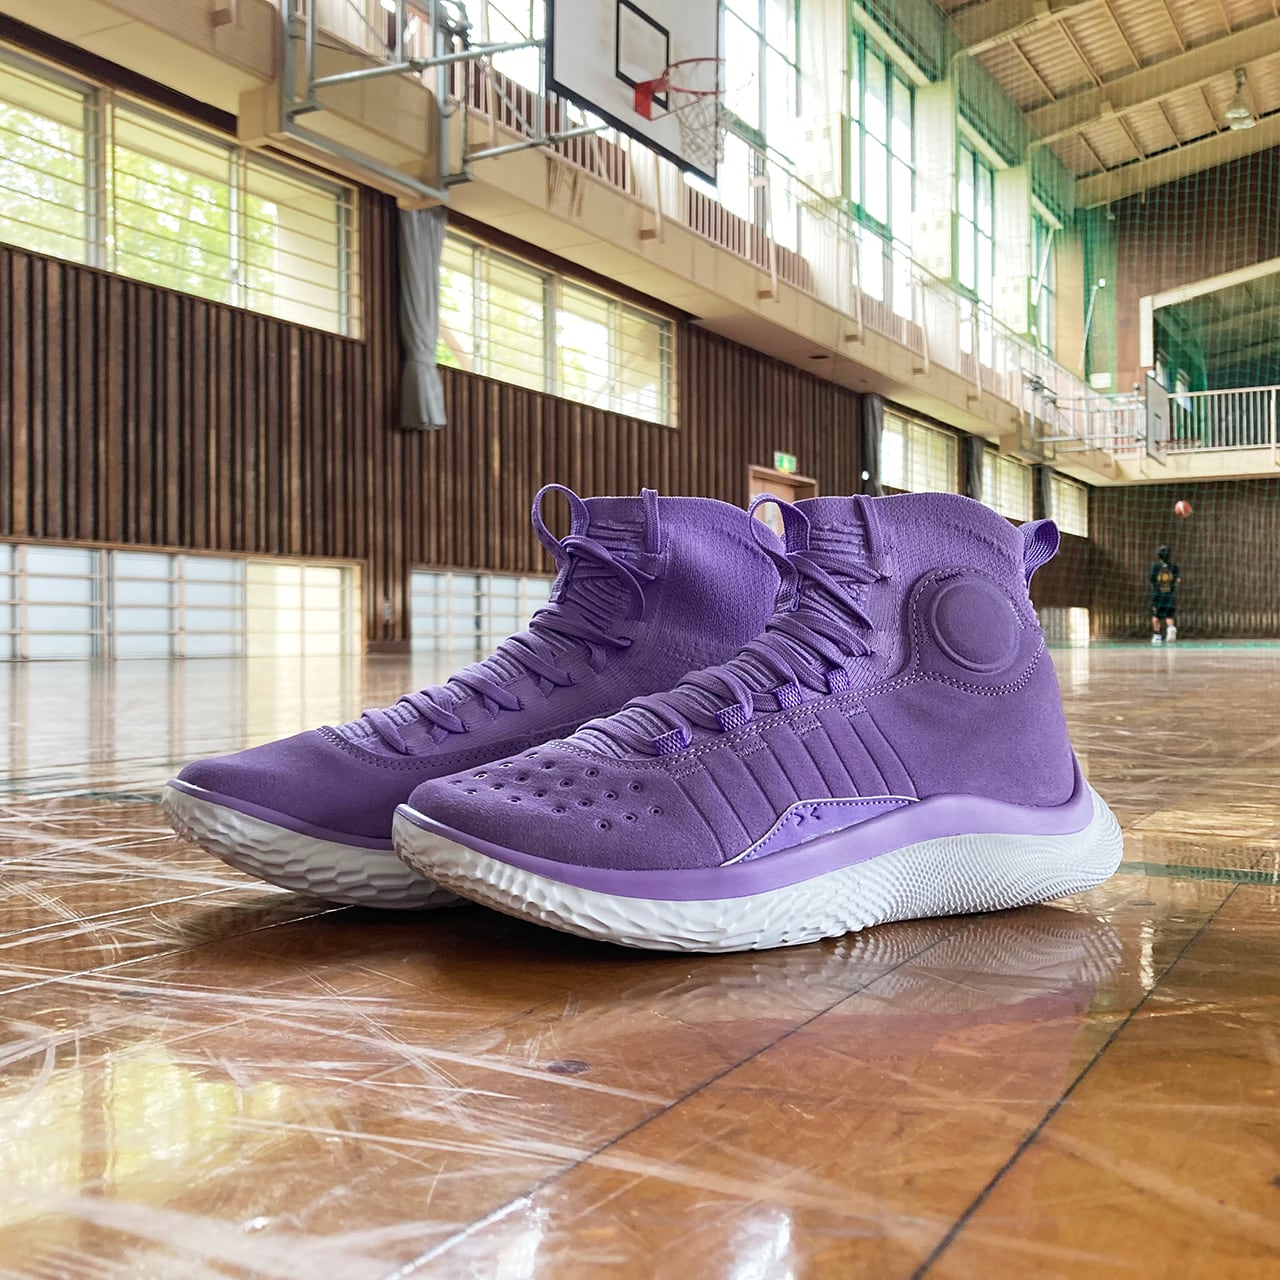 Under Armour CURRY 4 FLOTRO /カリー4 フロトロ